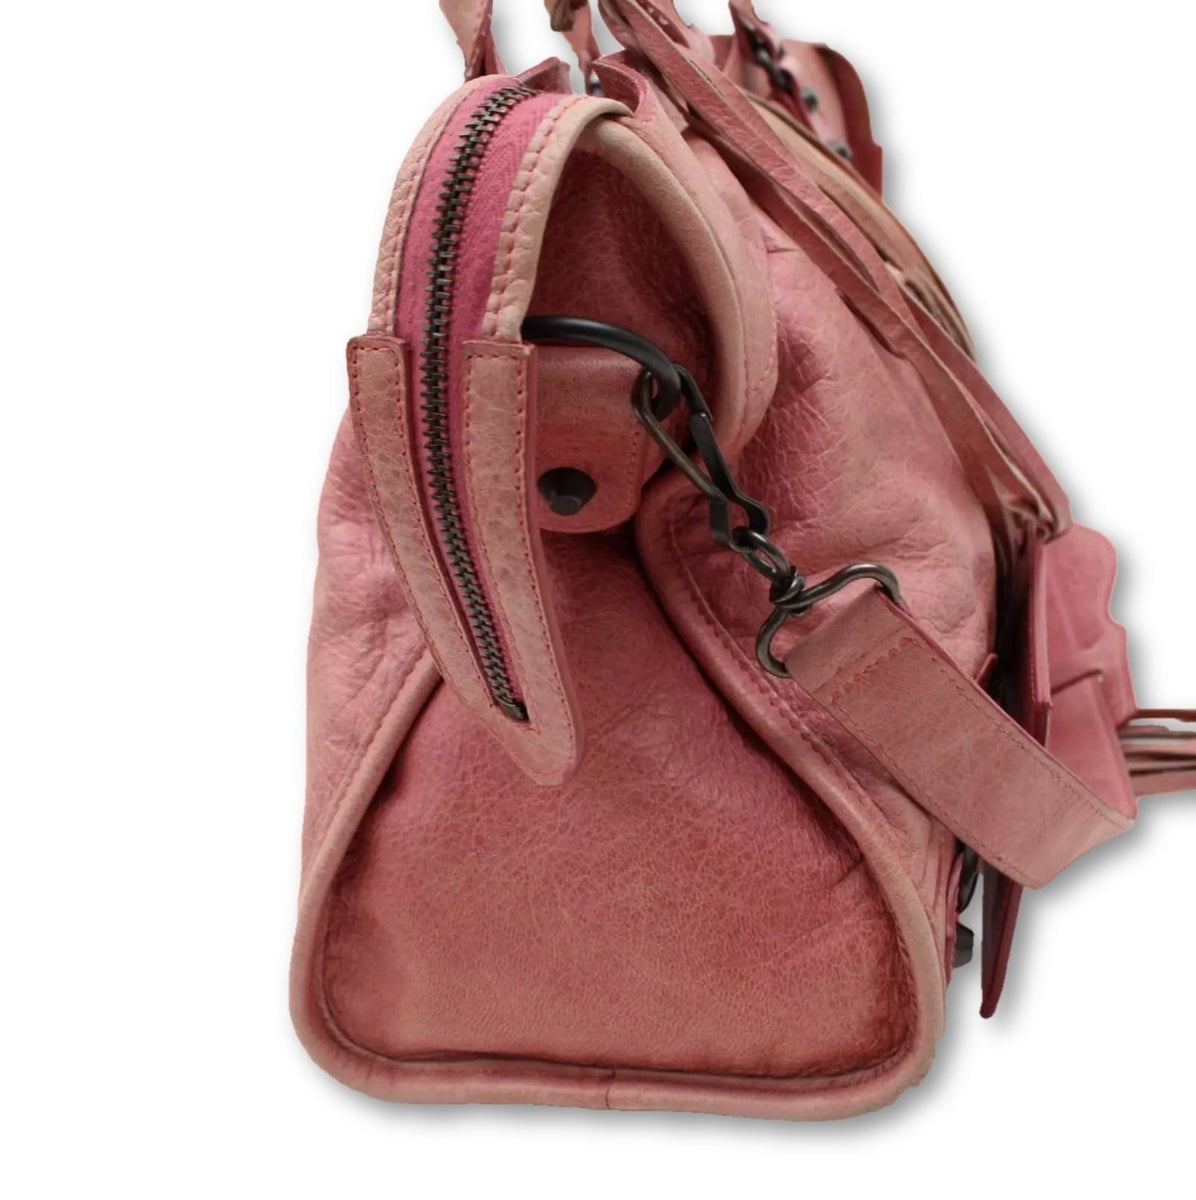 Religiøs samtale race Balenciaga City Motorcycle Bag Framboise Red-Pink | AuthenticBagsOnly.com –  Just Gorgeous Studio | Authentic Bags Only